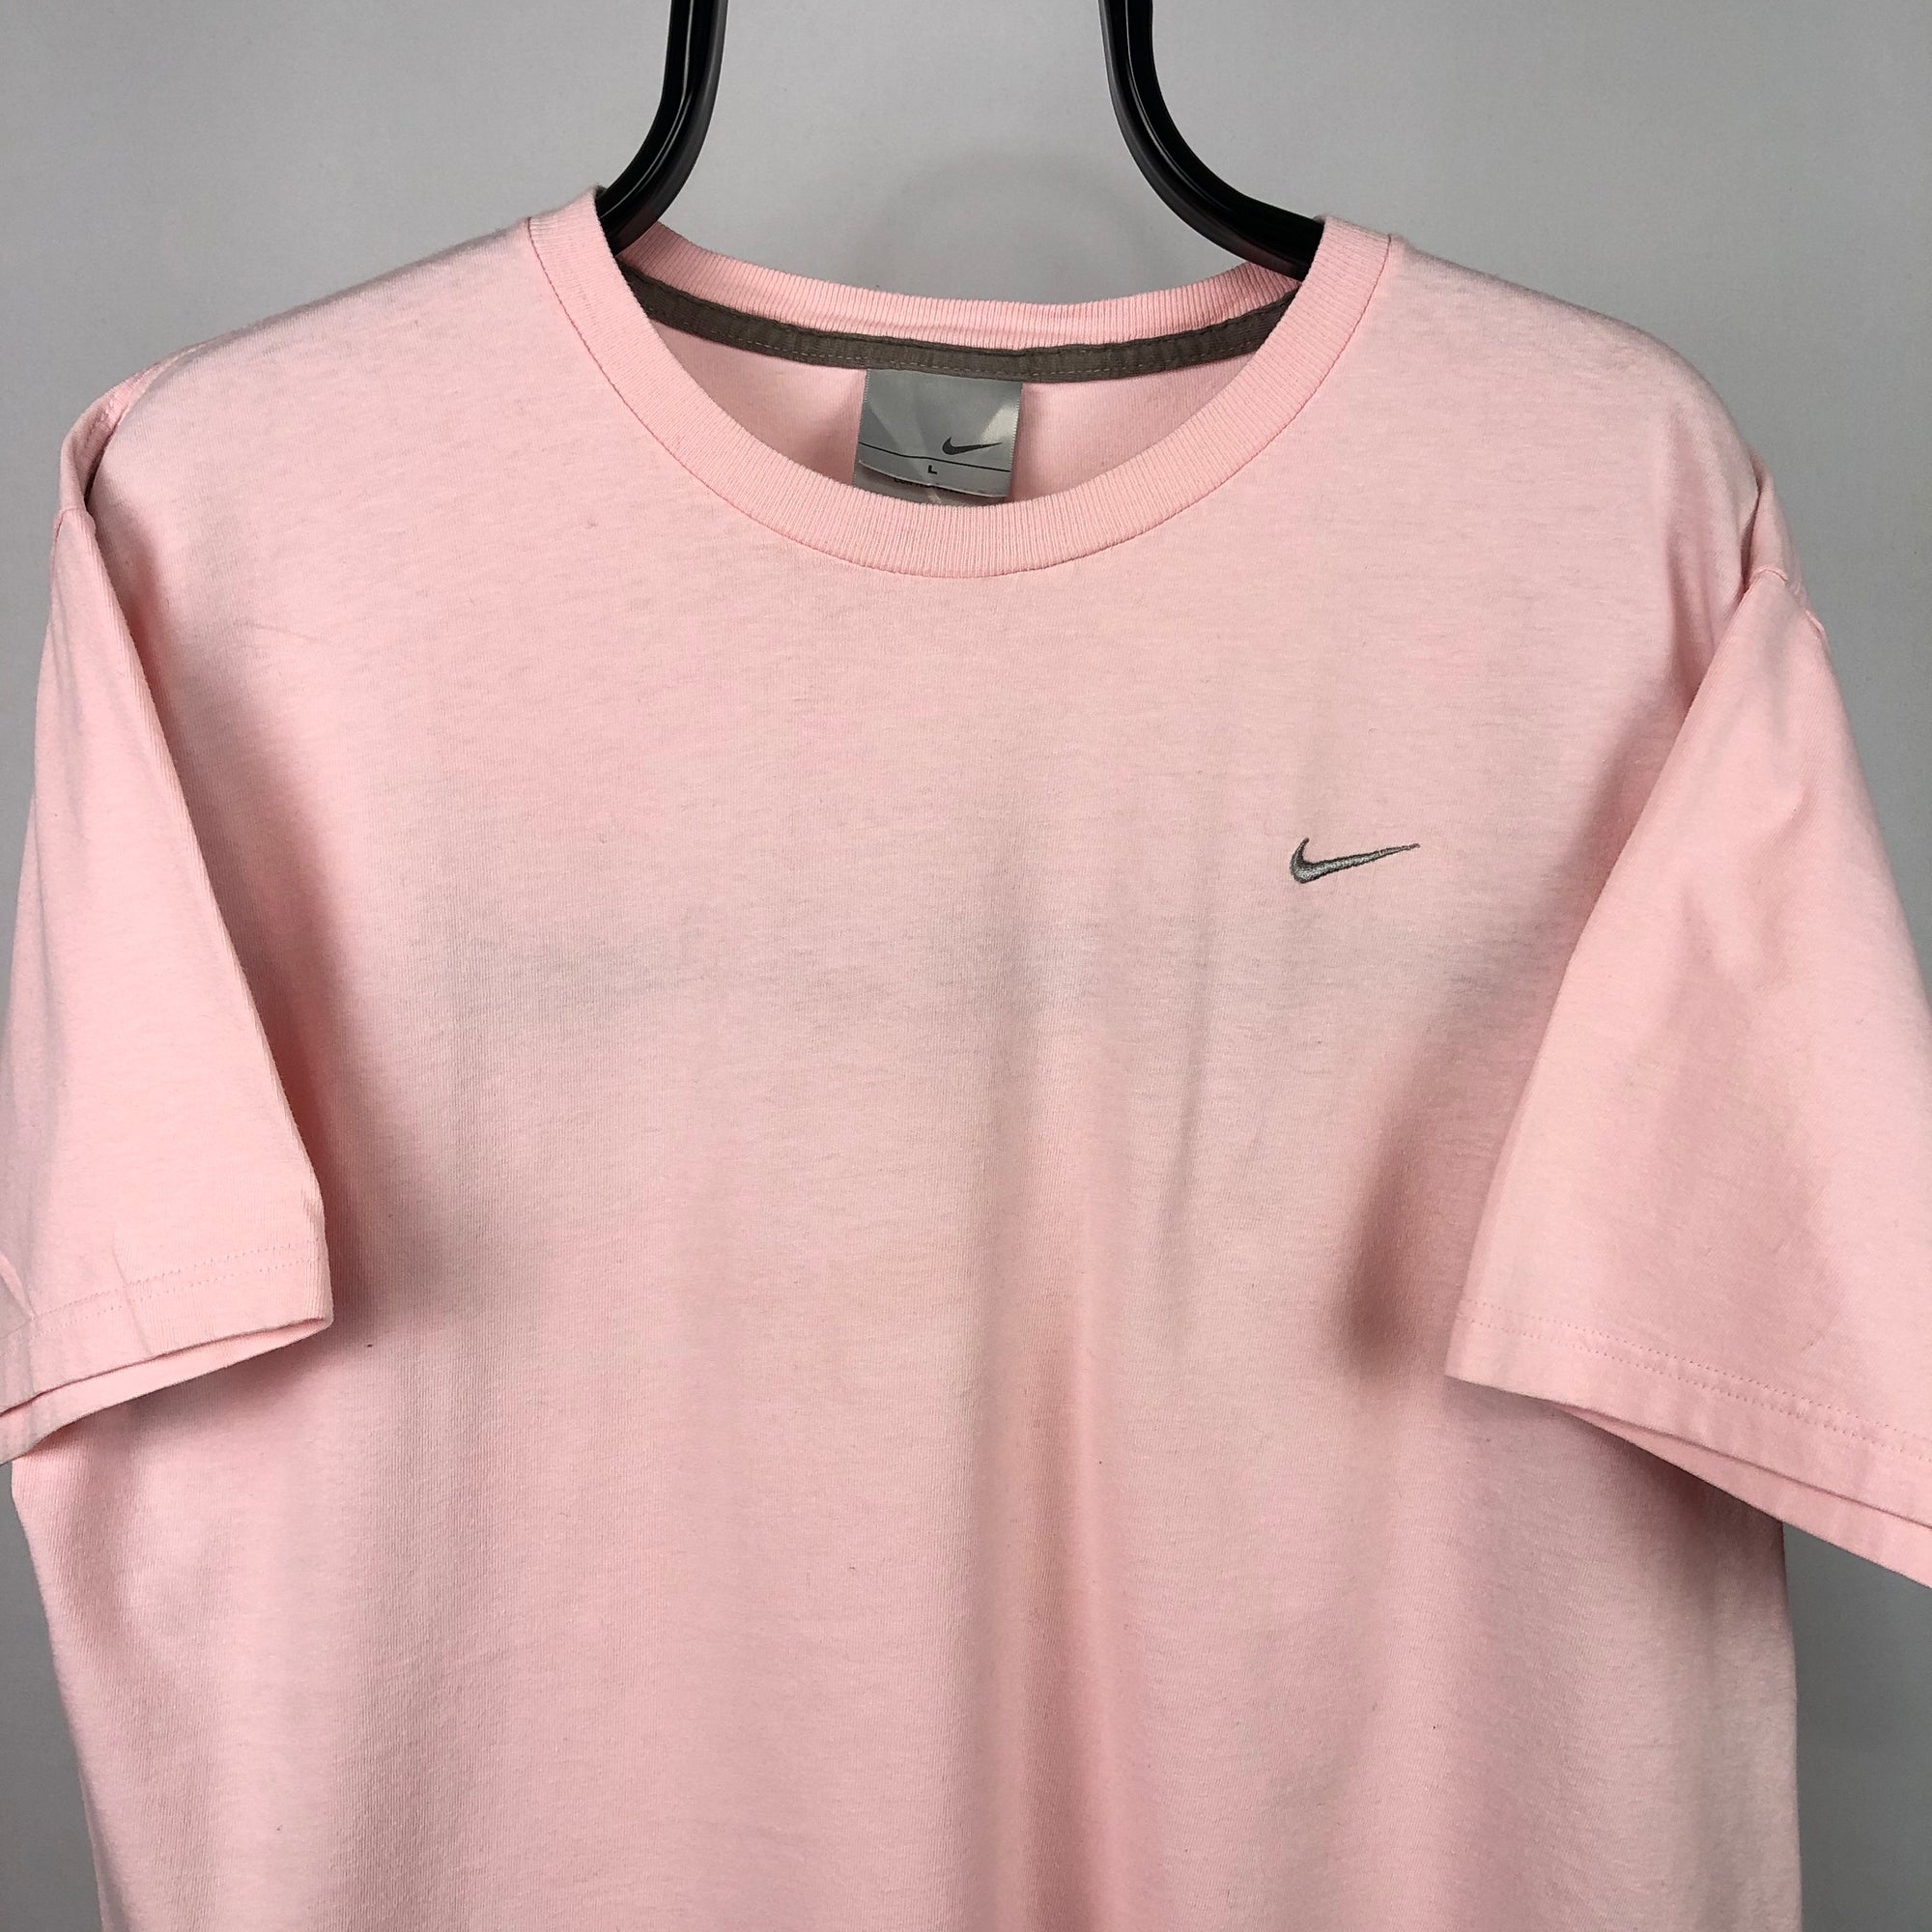 Vintage 90s Nike Embroidered Swoosh Tee in Baby Pink - Men's Large/Women's XL